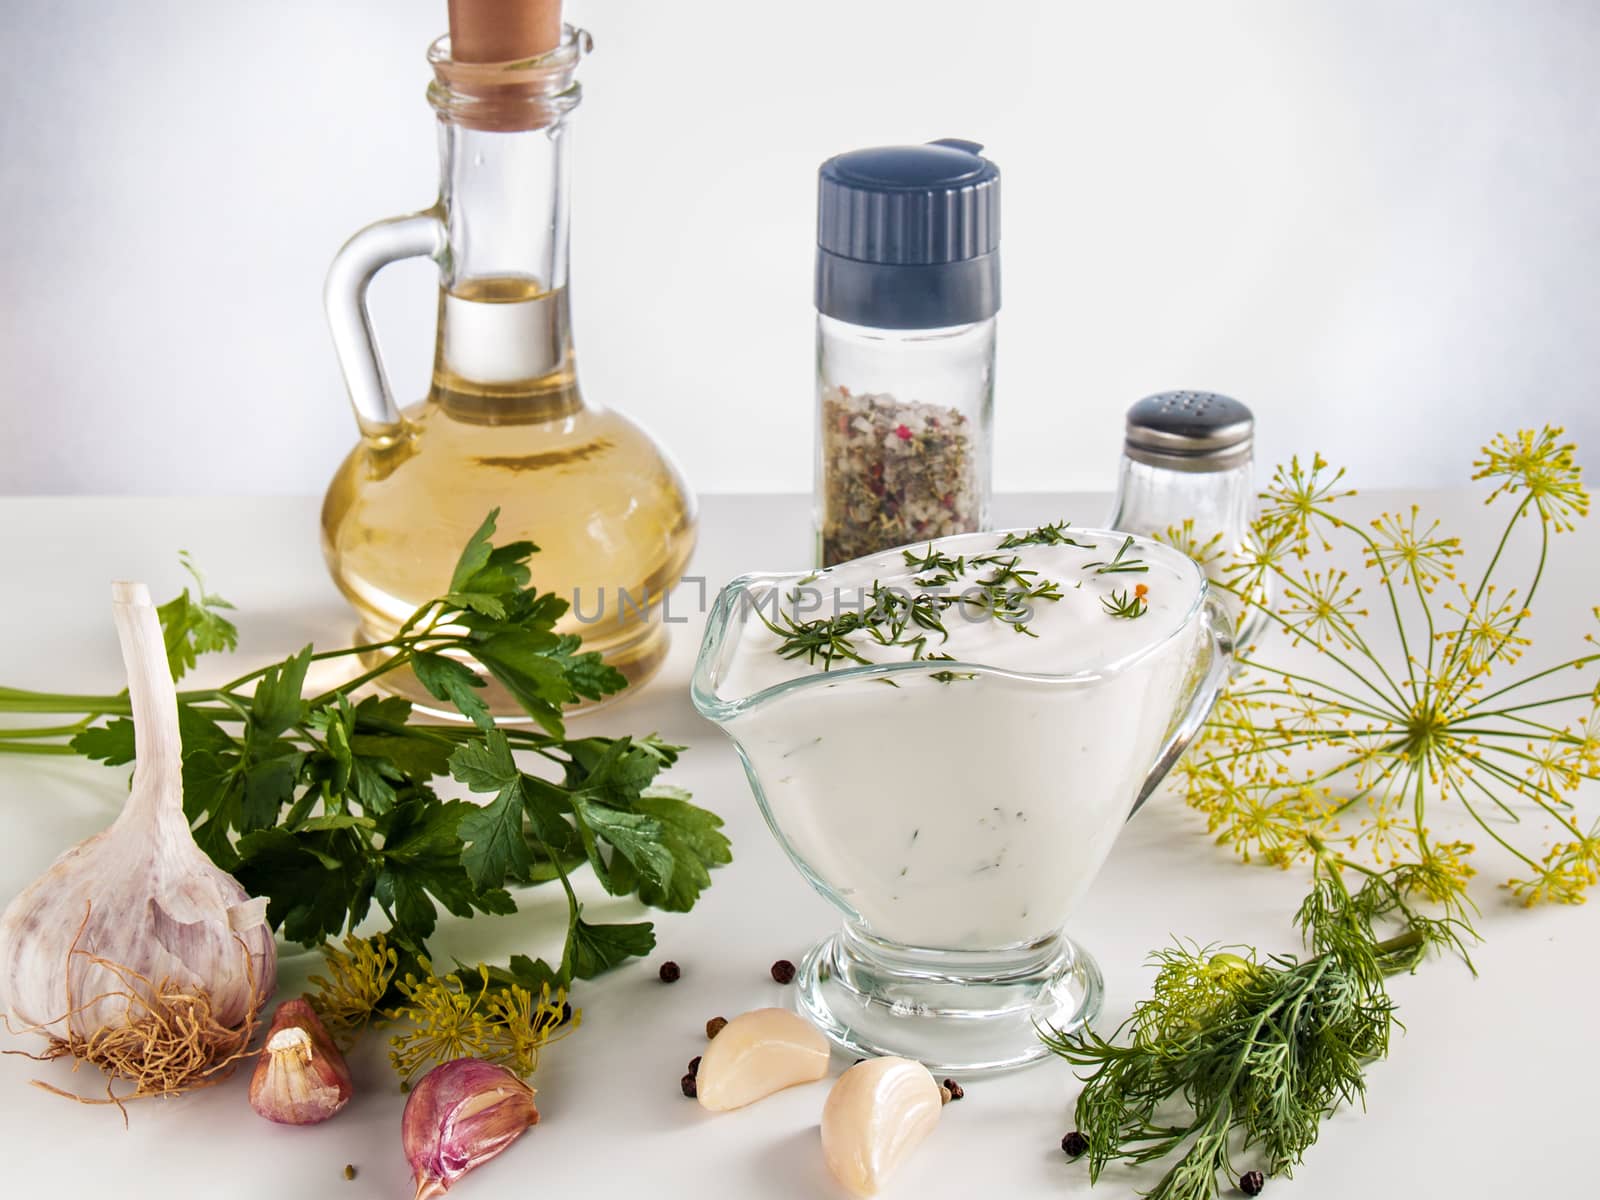 Cooked sour cream sauce with garlic, herbs, parsley, dill, herbs, pepper in a glass bowl on a white background with butter in a bottle, with pepper and salt jars